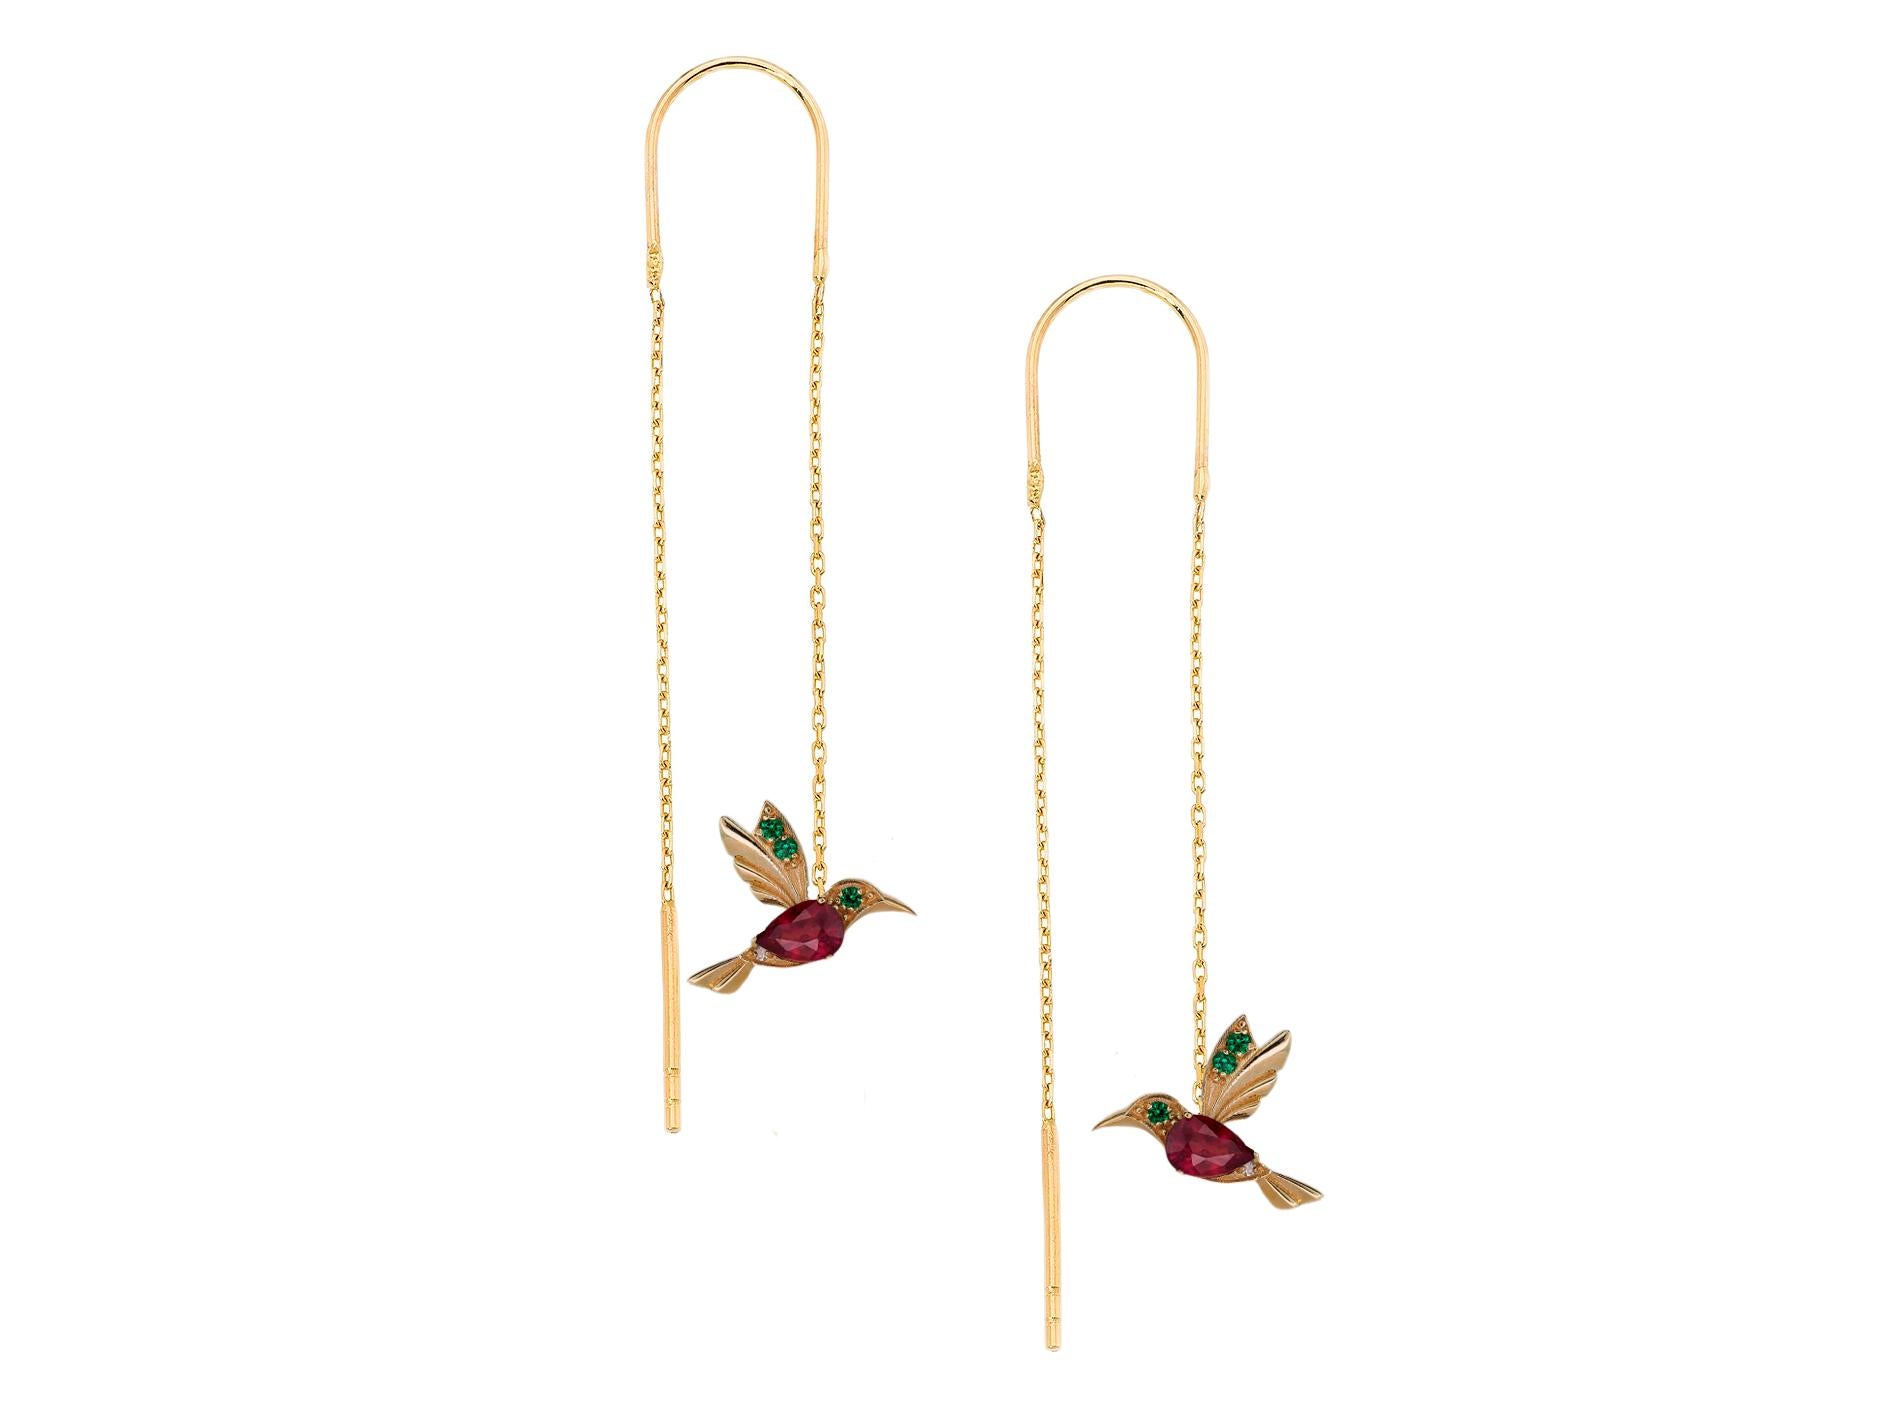 Pear Cut Hummingbird Threader Earrings with Rubies in 14k Gold! For Sale